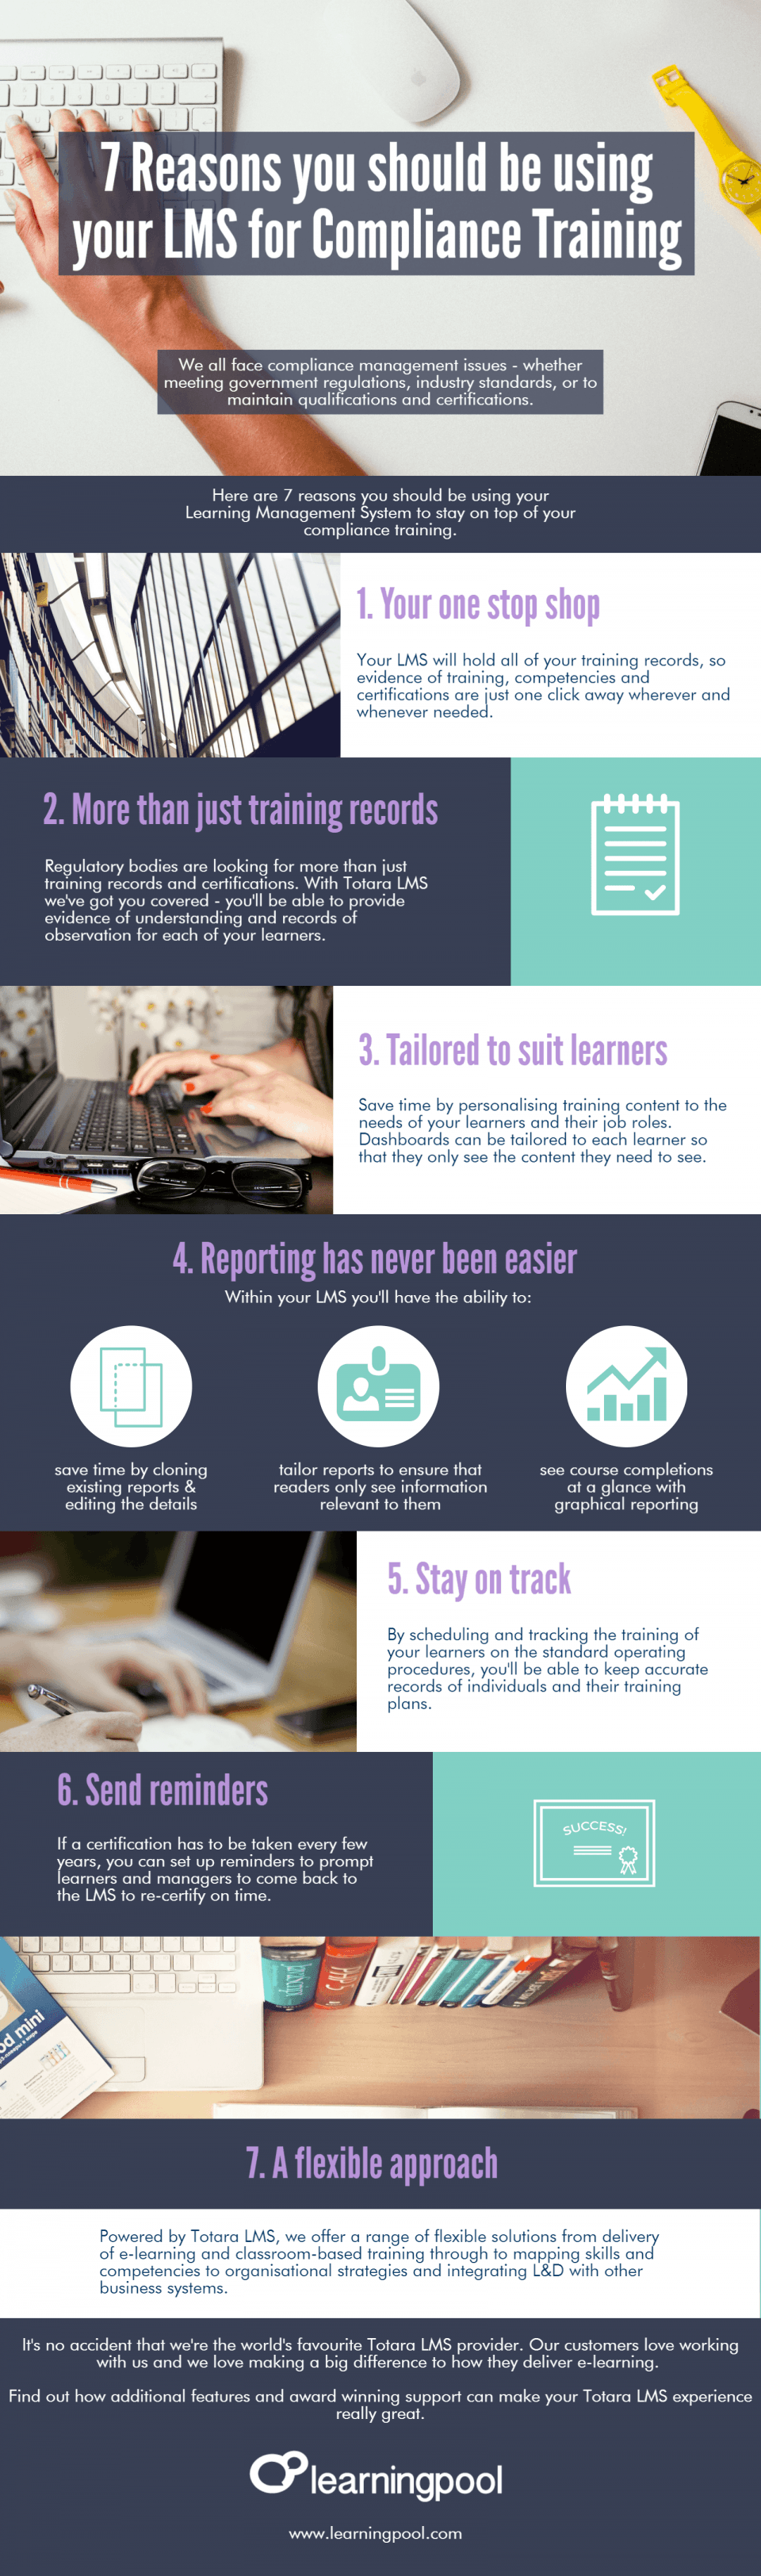 Using your LMS for Compliance Training Infographic